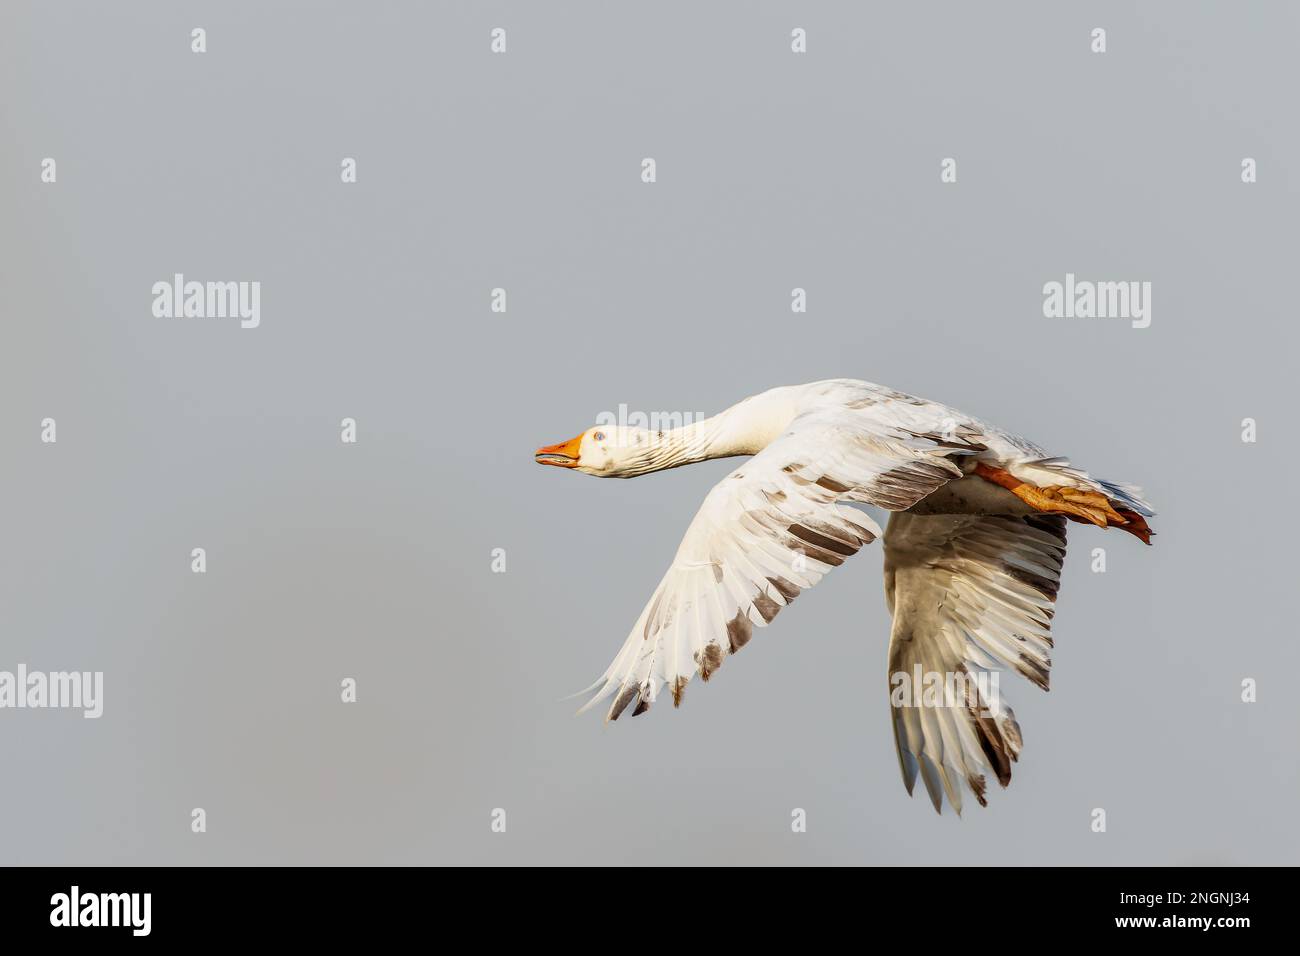 Close up of a Greylag goose, Anser anser, in flight, showing albinism with some gray and black feathers and spots in the mostly white plumage Stock Photo